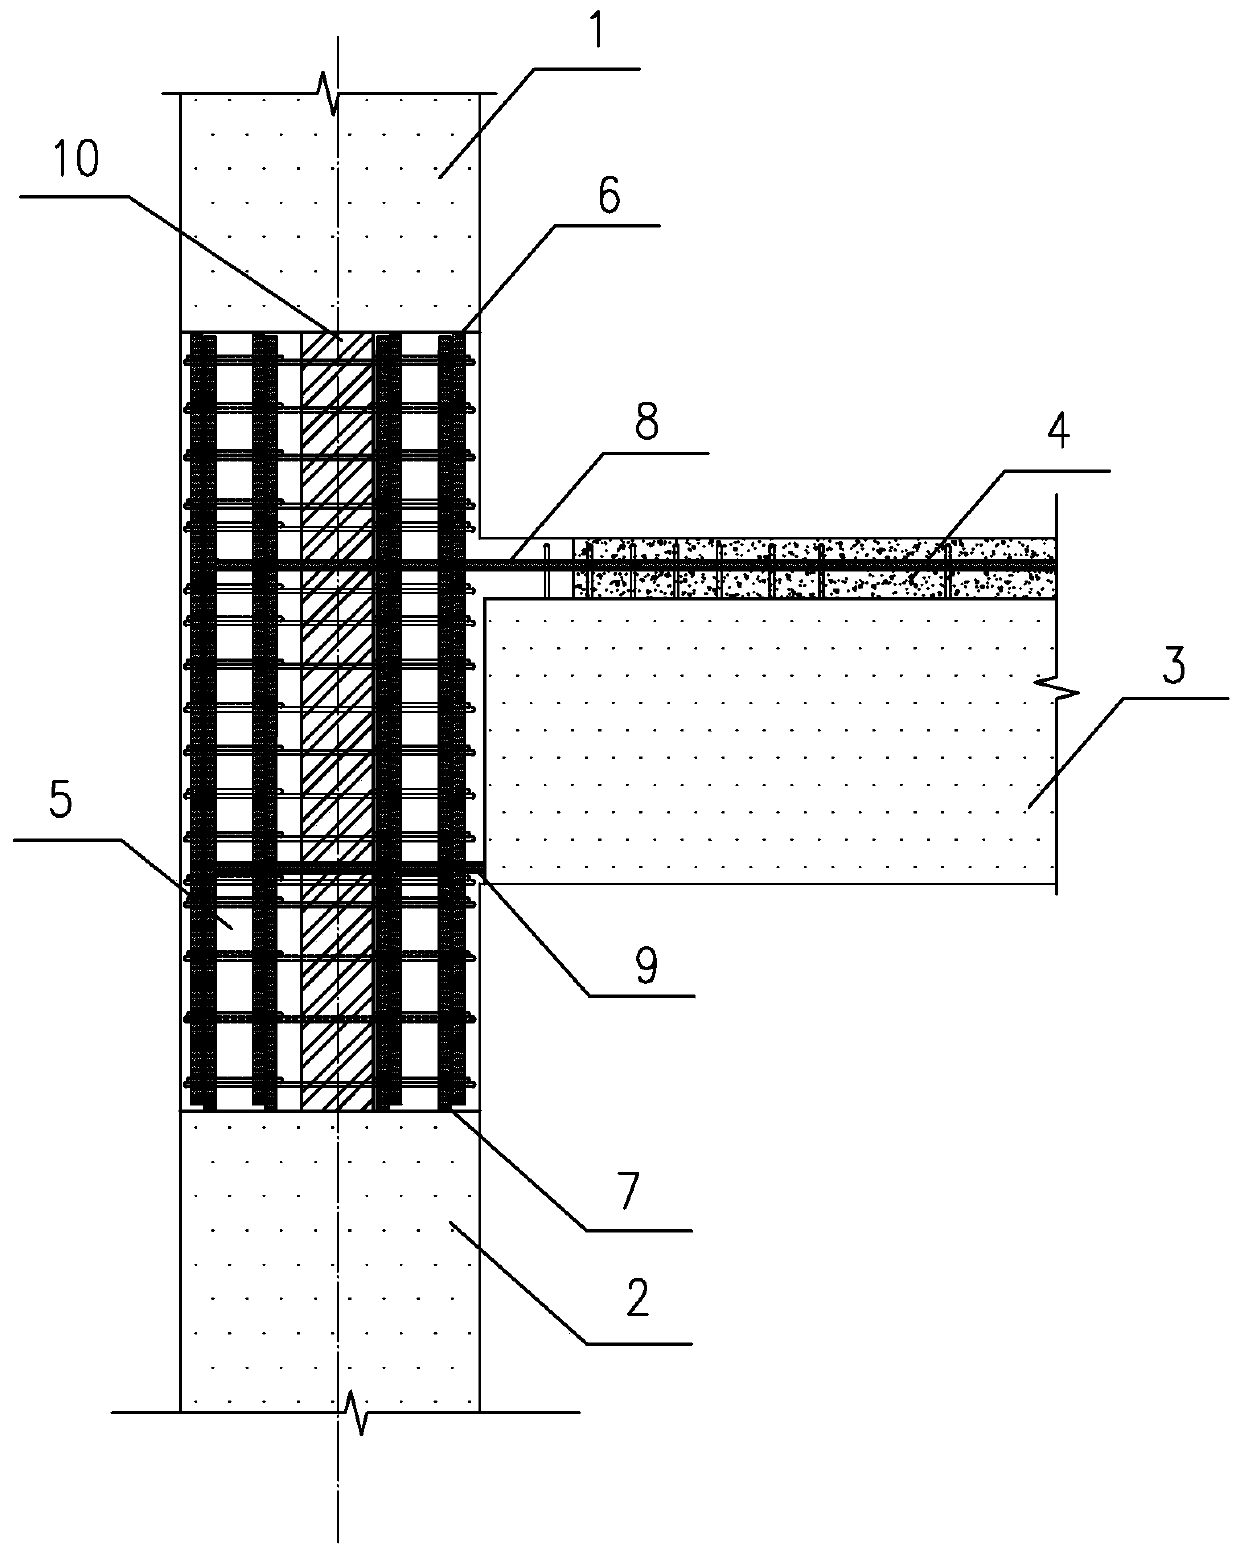 A joint connection method of vertical prefabricated components